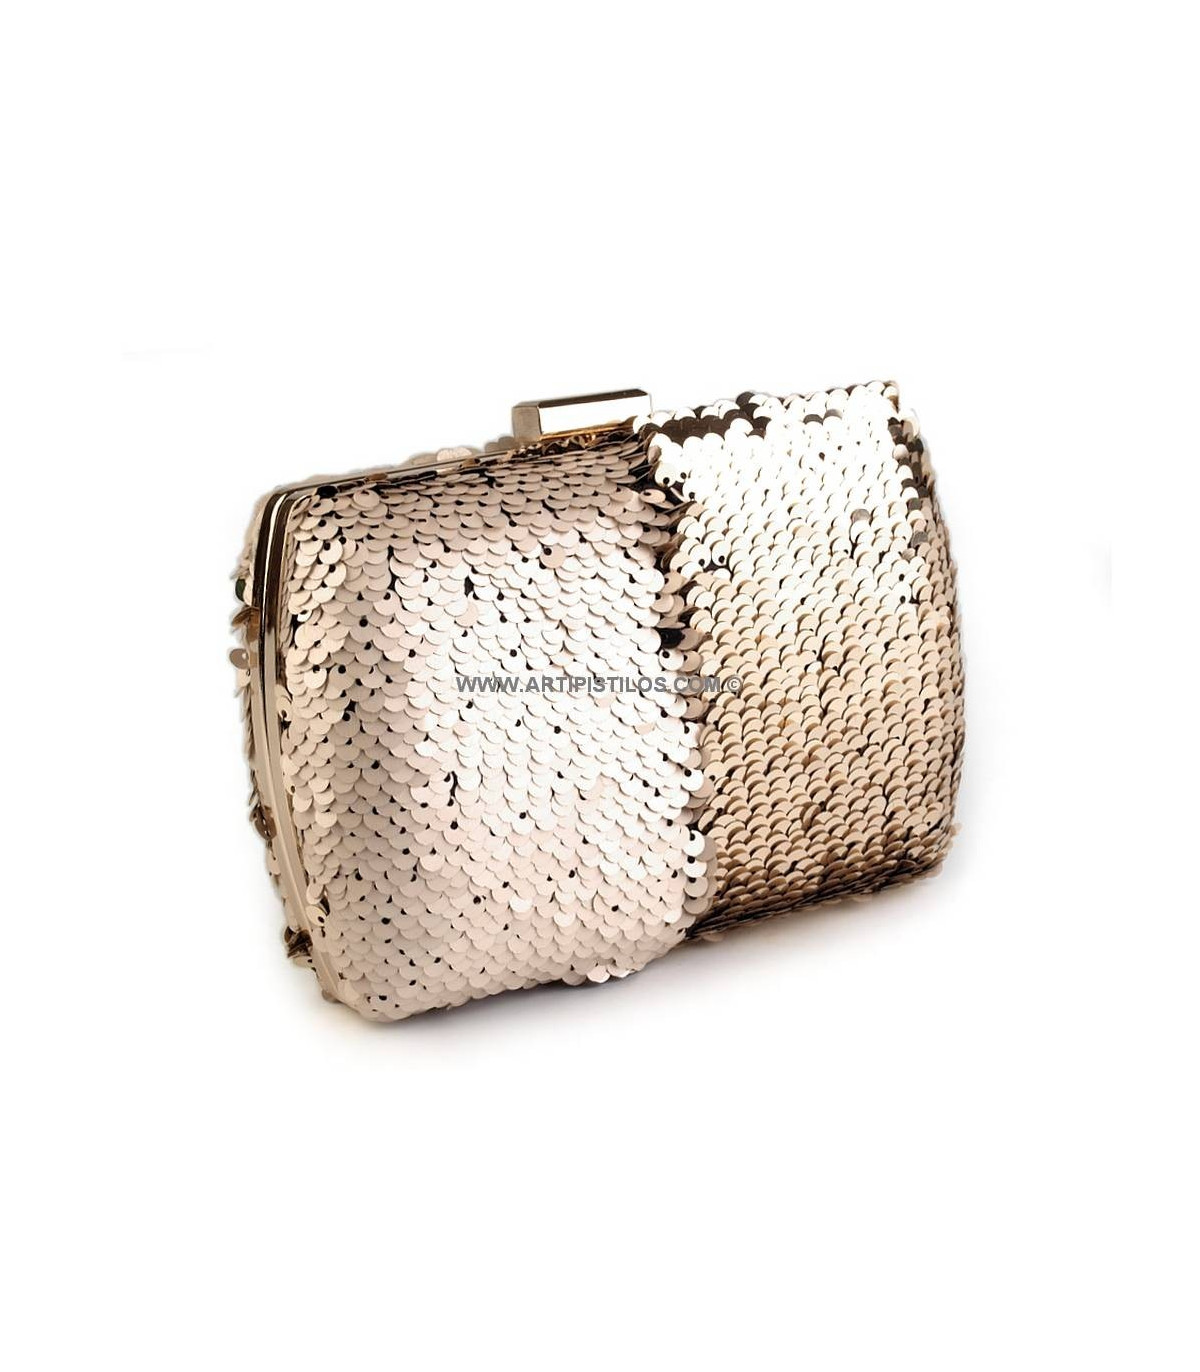 Shimmer Box Frame Hard Shell Clutch Evening Bag with Detachable Strap,  Party Wedding